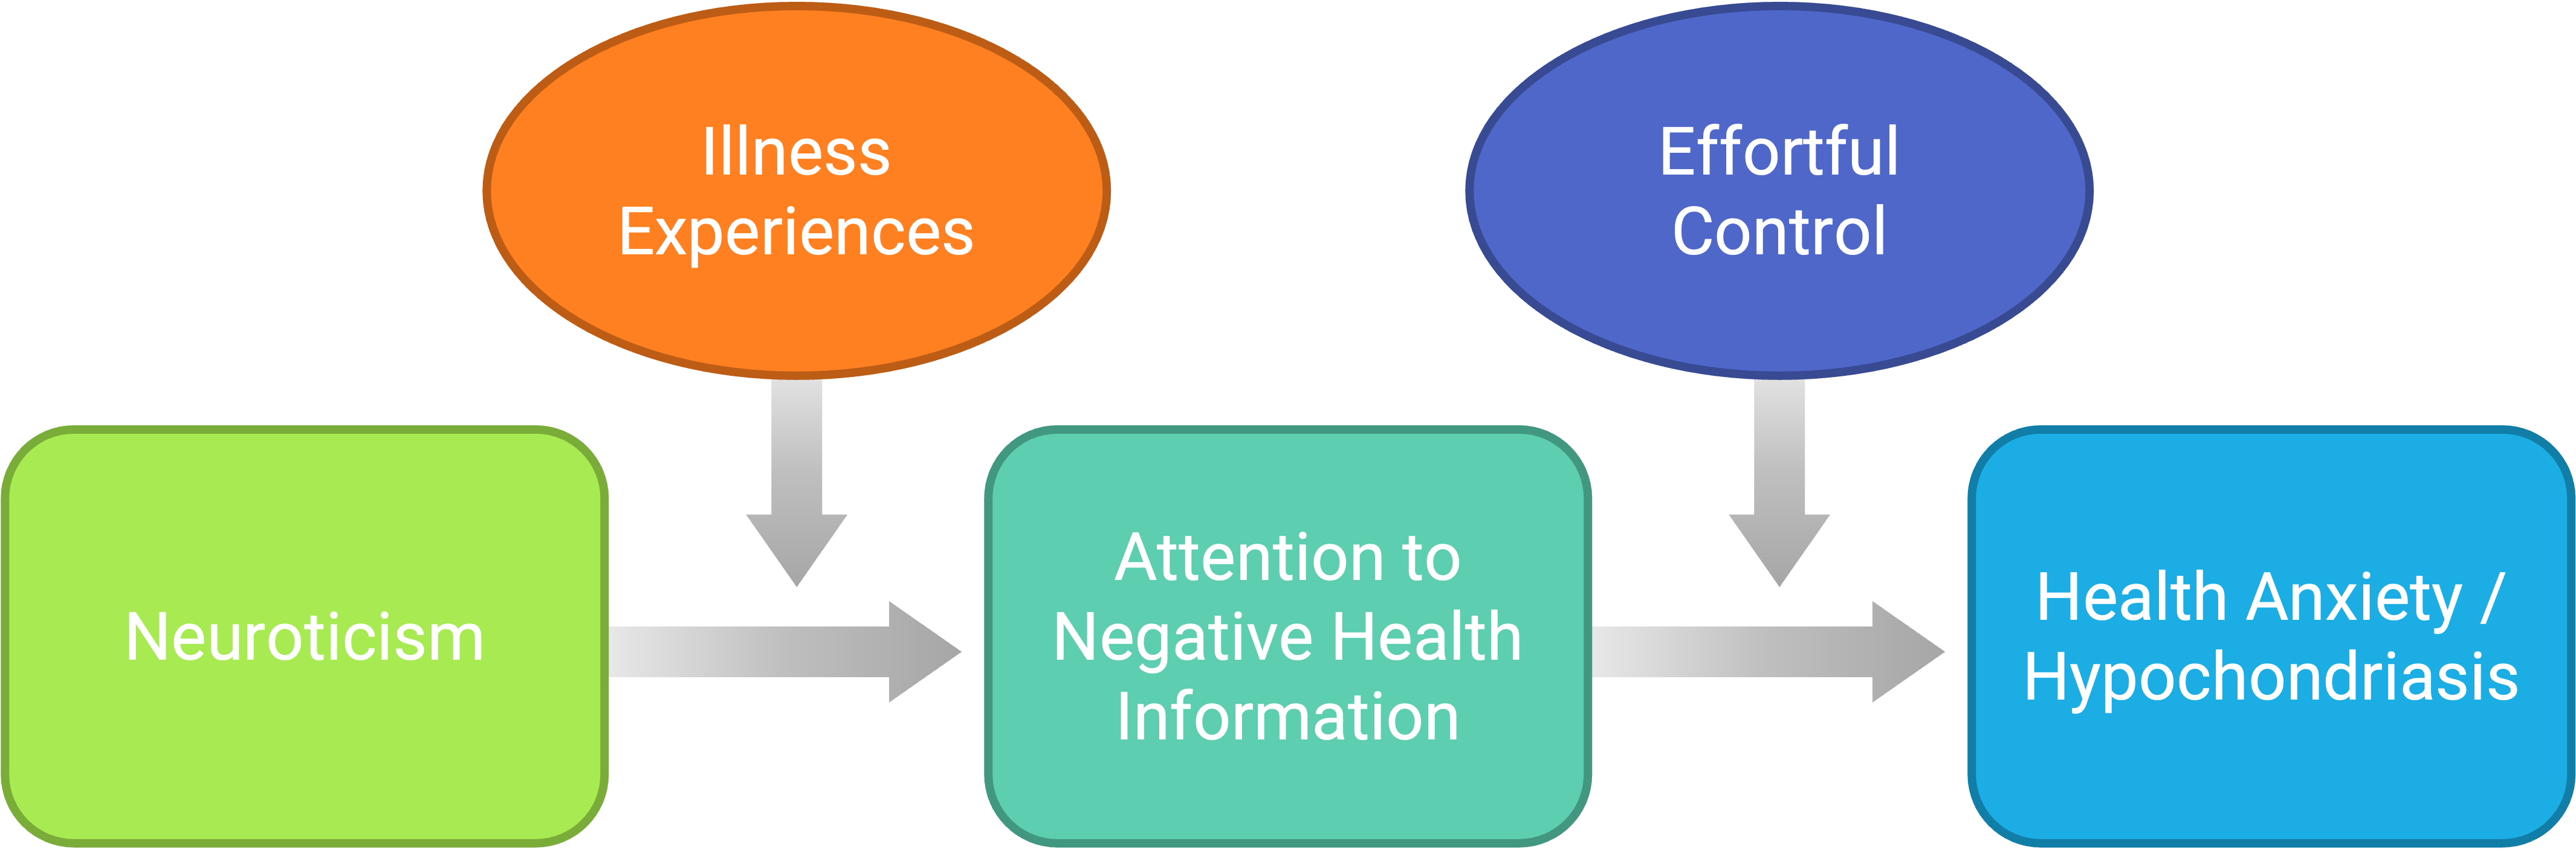 A simplified representation of one contemporary theory of hypochondriasis. This theory focuses on key variables and the relationships among them.